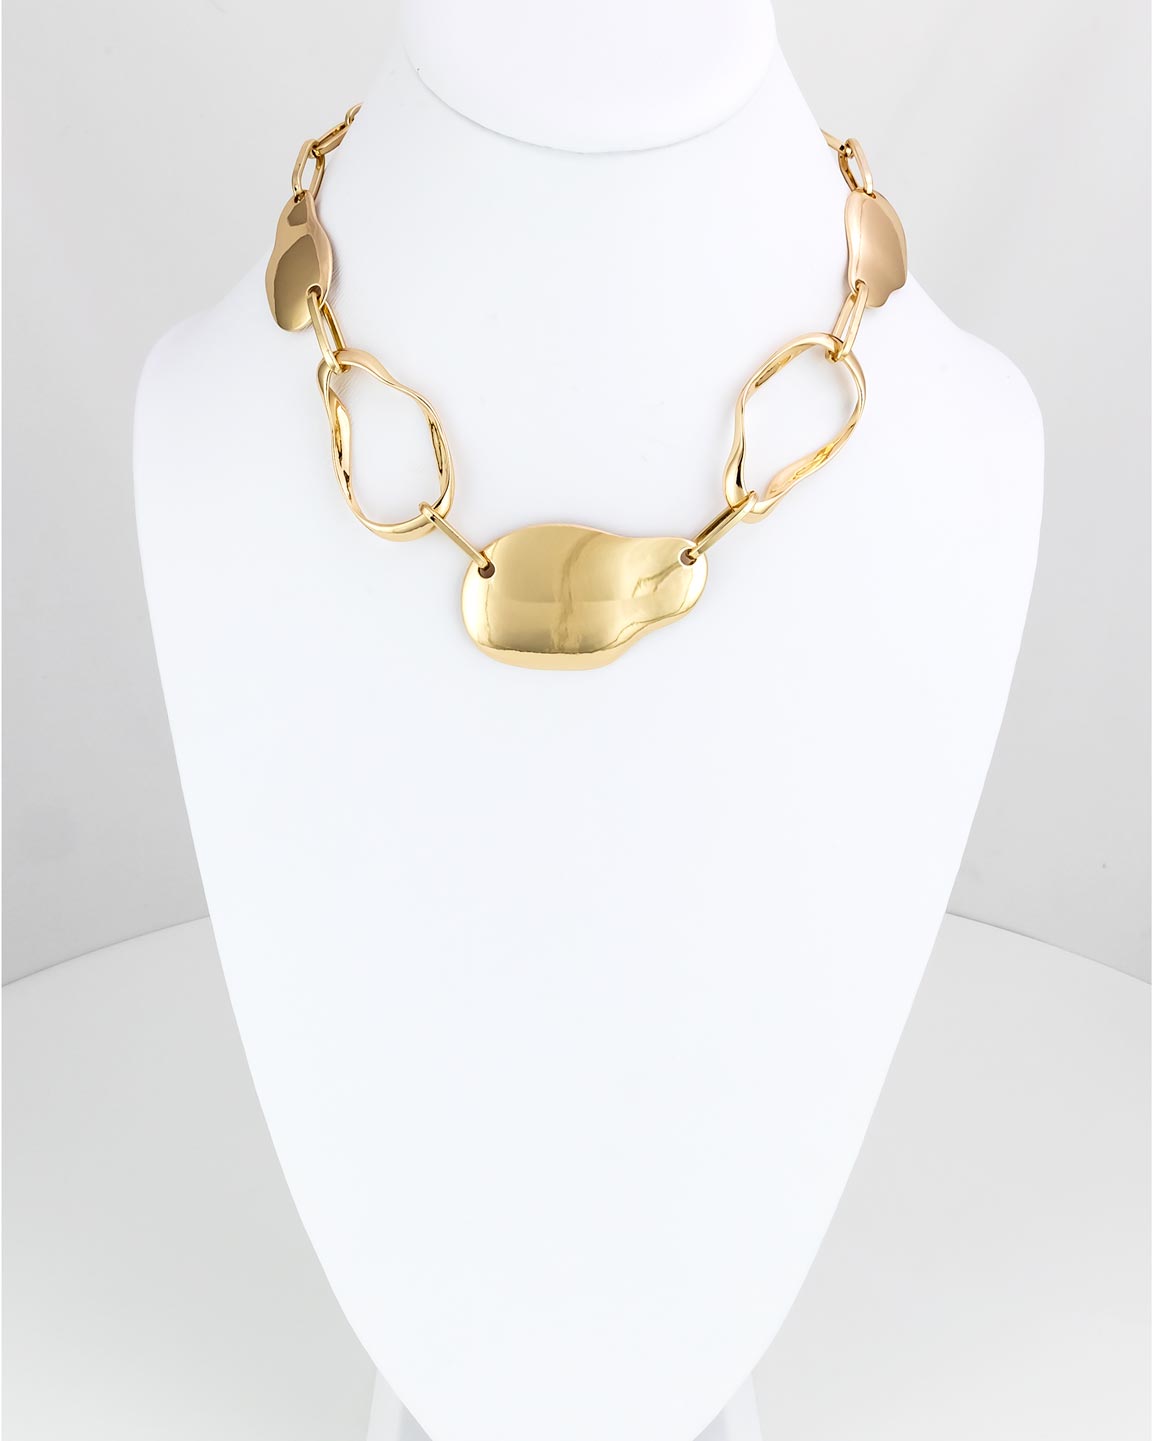 Dauplaise Jewelry - Sculpted Statement Necklace